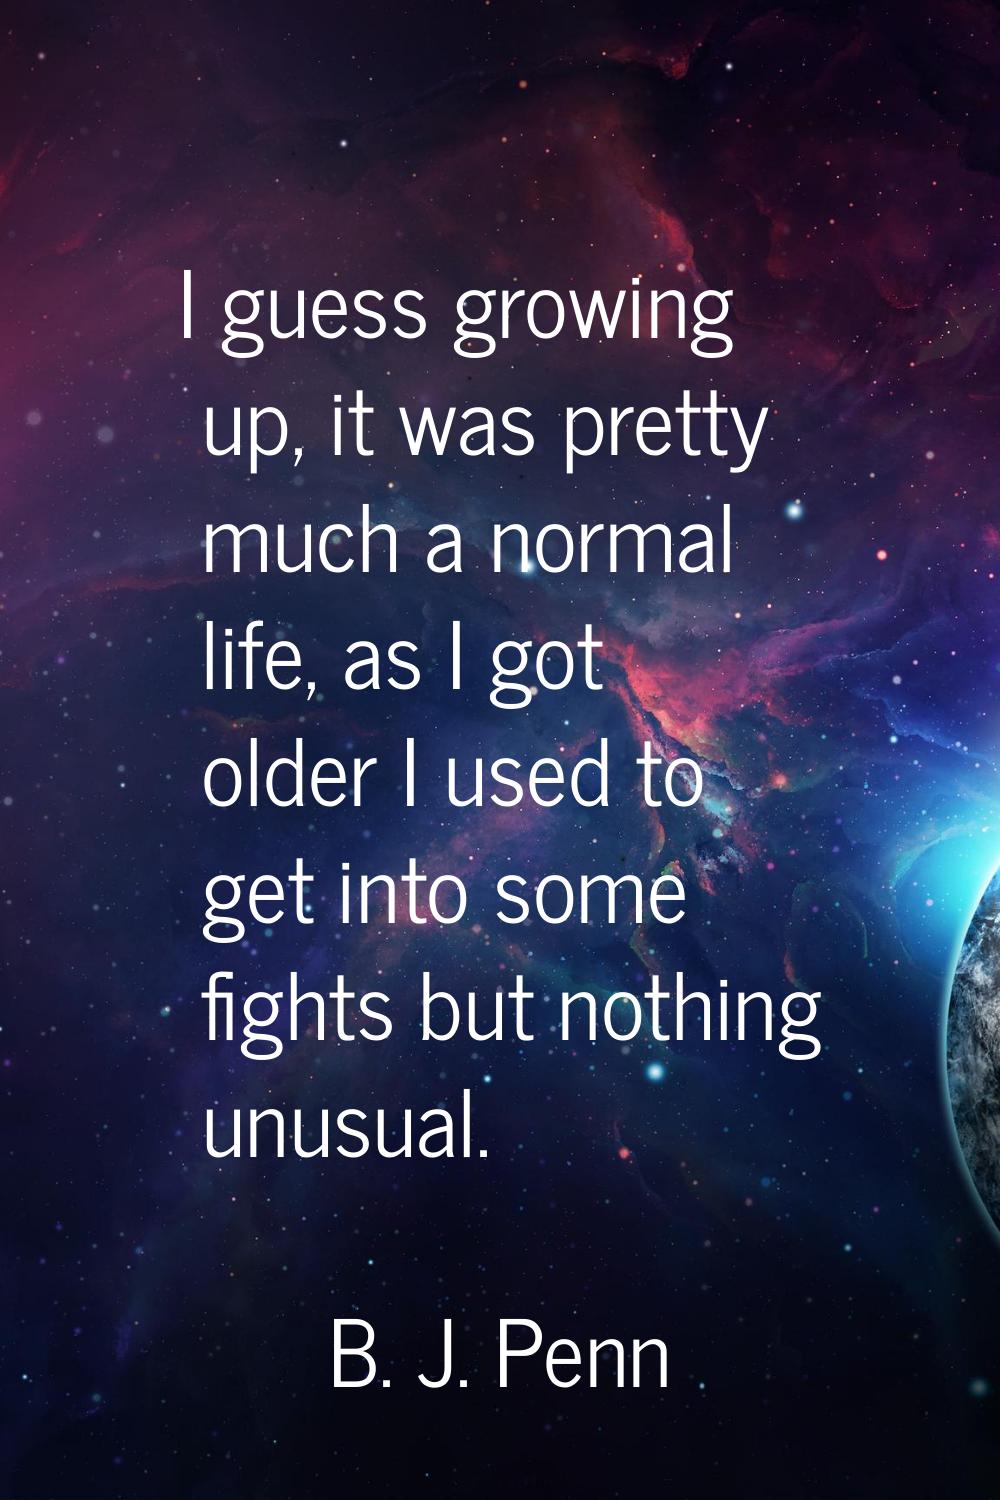 I guess growing up, it was pretty much a normal life, as I got older I used to get into some fights